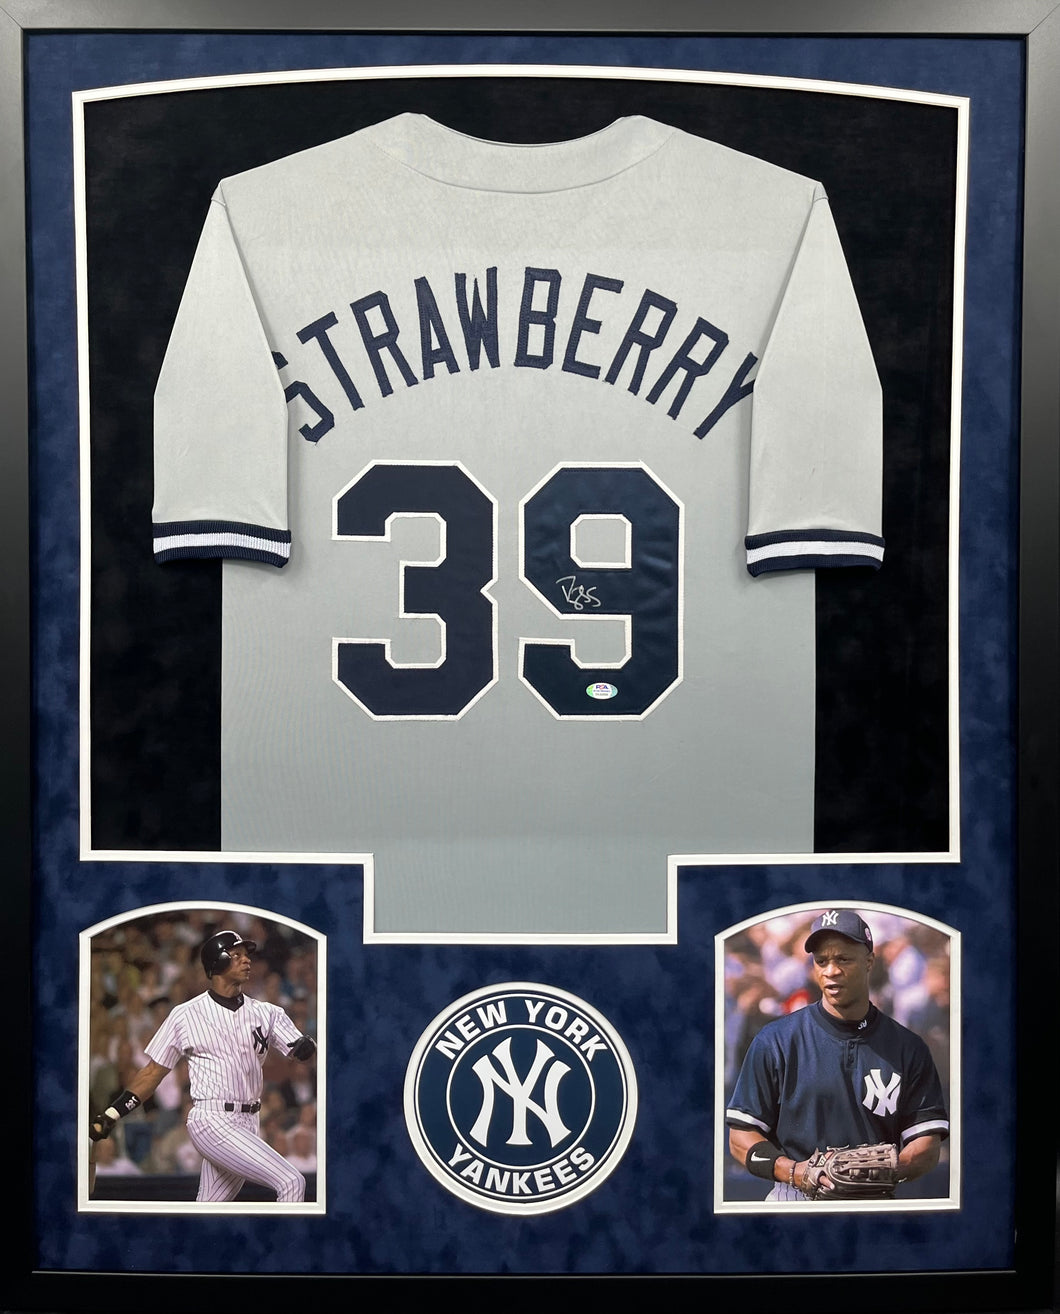 New York Yankees Darryl Strawberry Signed Custom Jersey Framed & Suede Matted with PSA COA